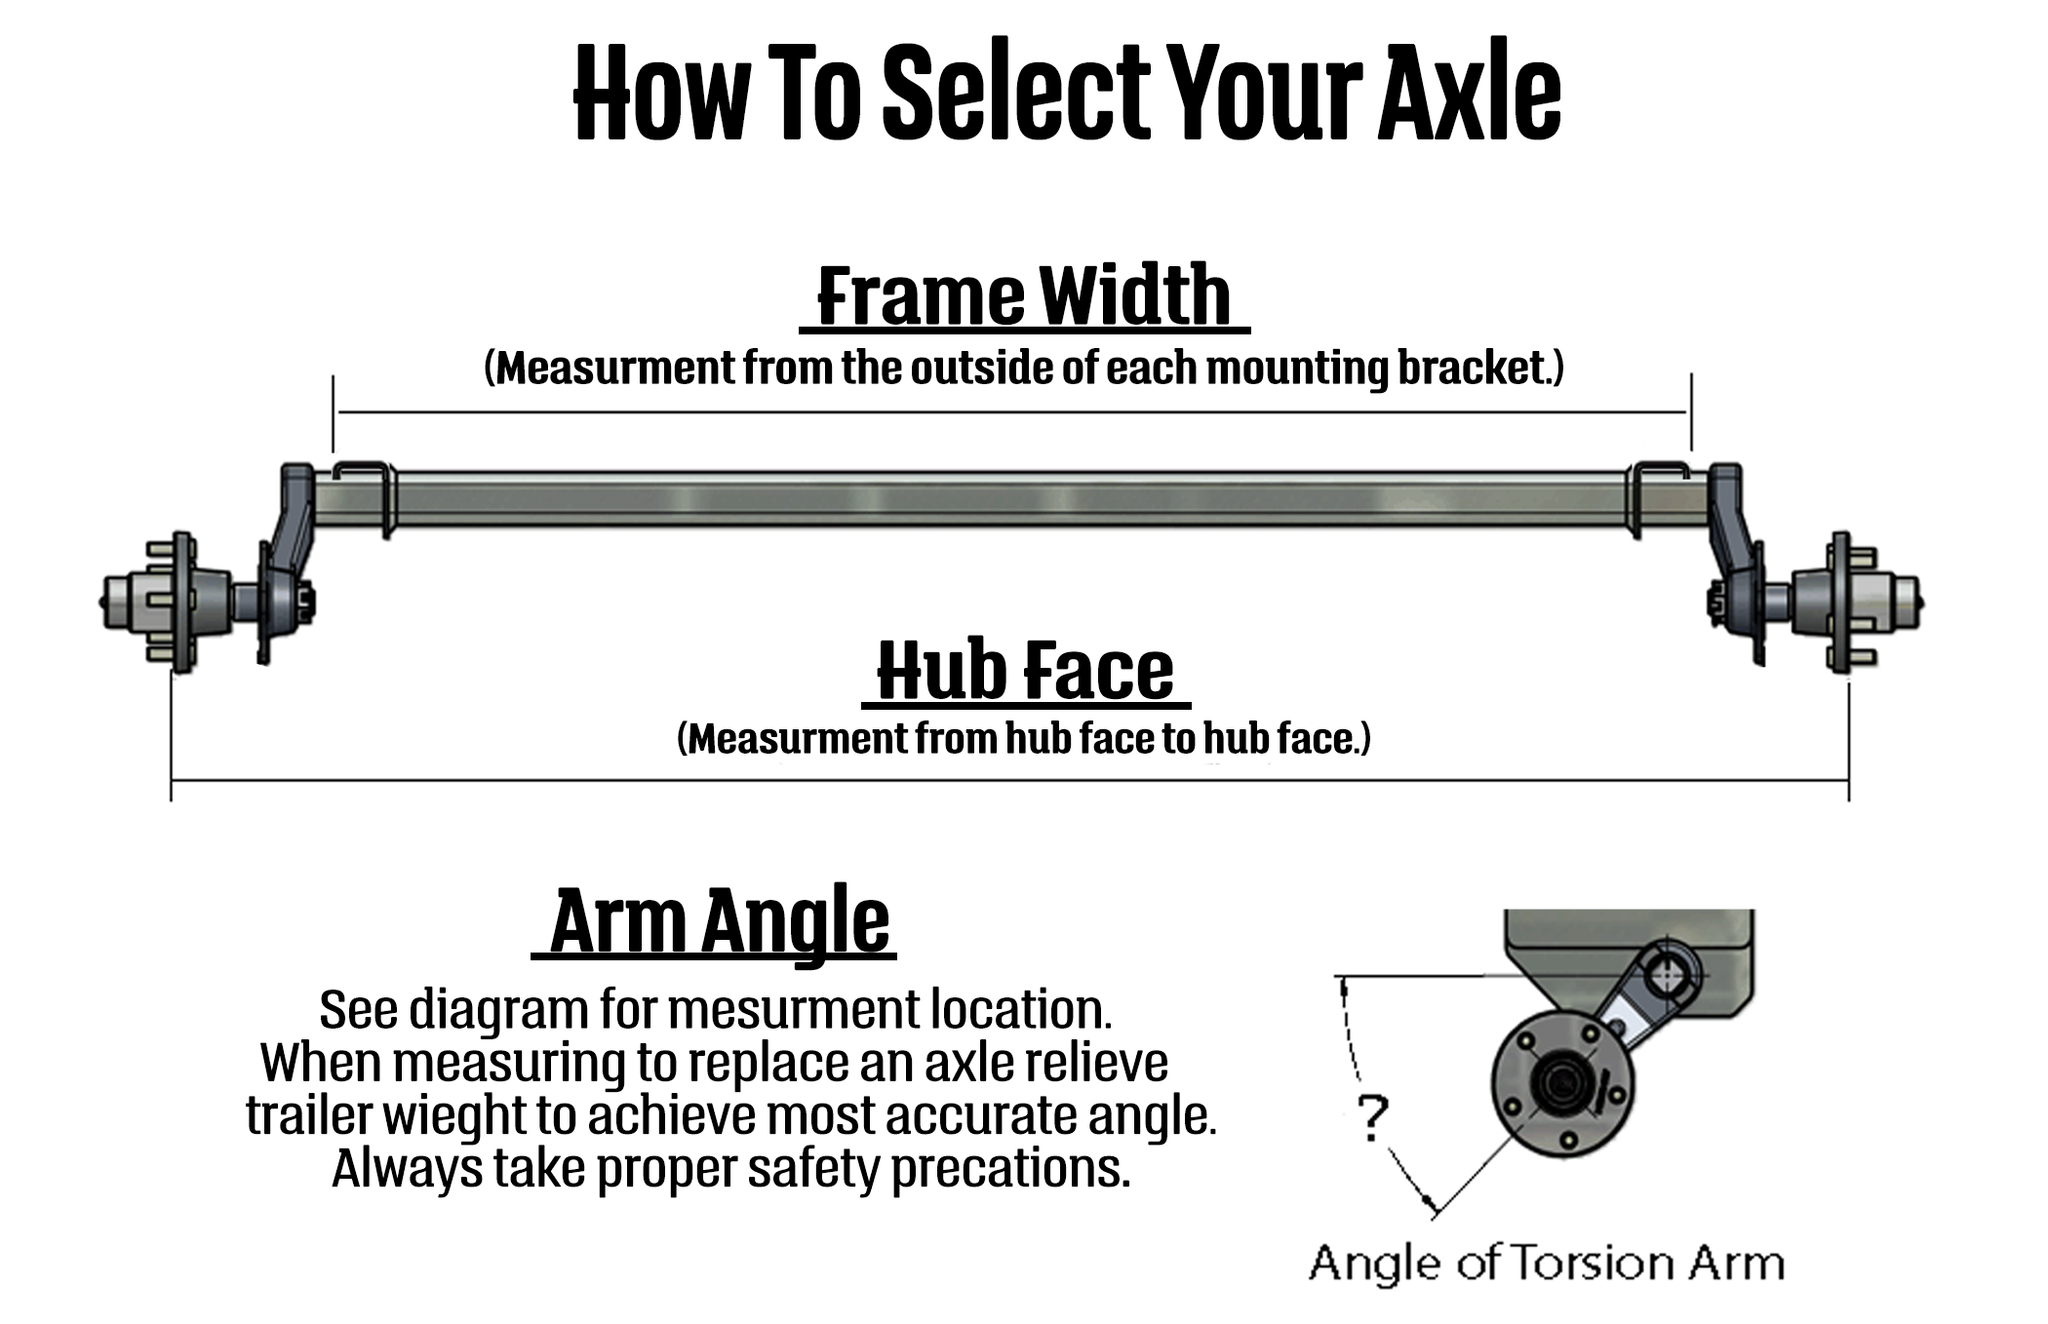 How to select your axle